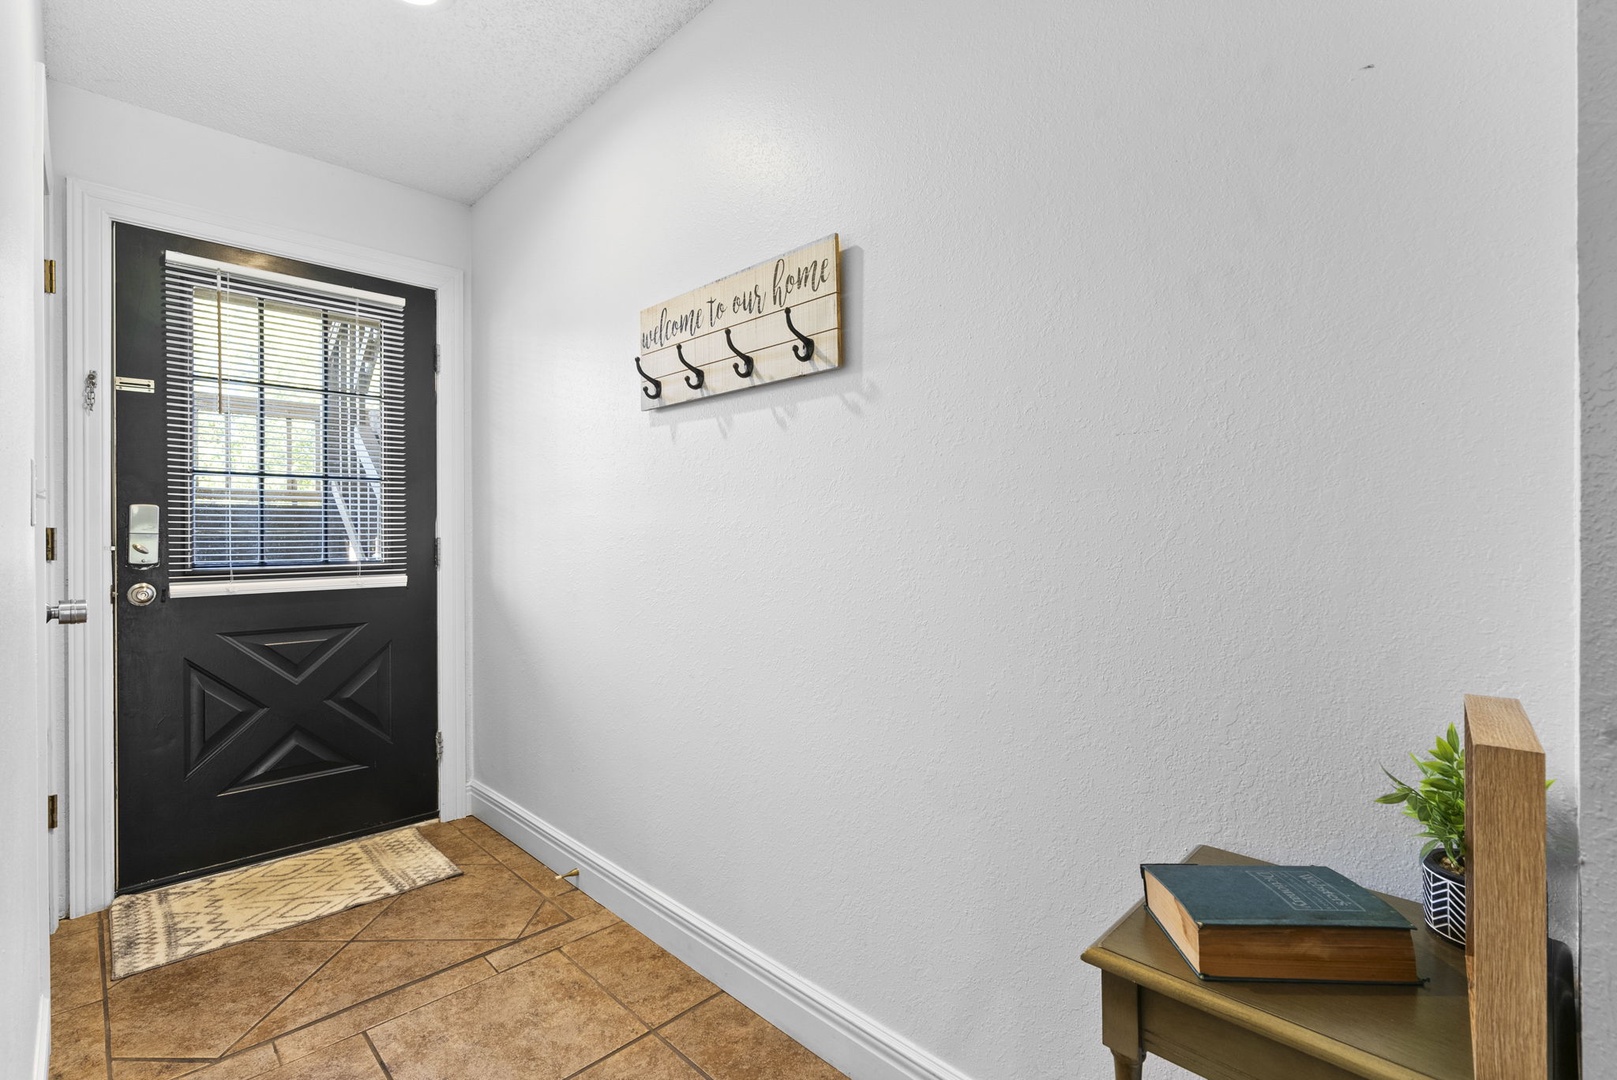 A bright, cheerful entryway will greet you upon your arrival